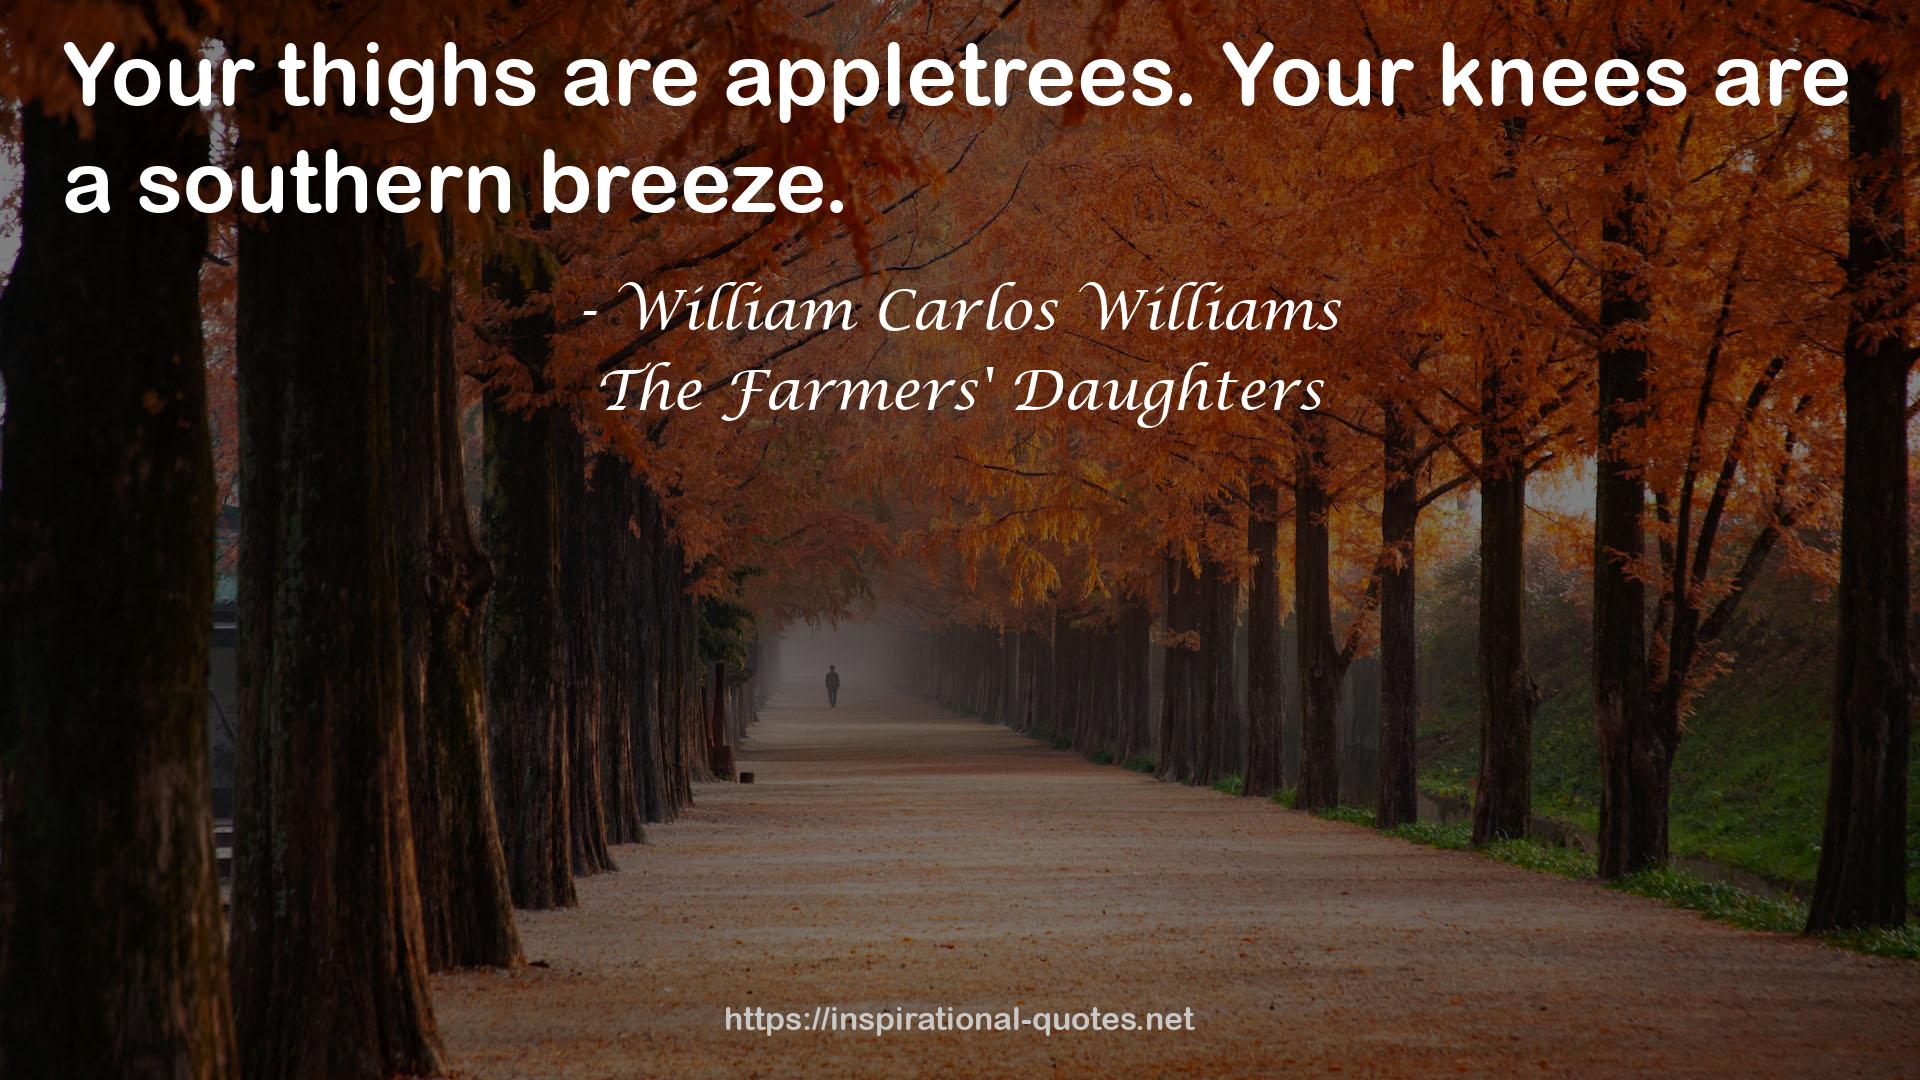 The Farmers' Daughters QUOTES